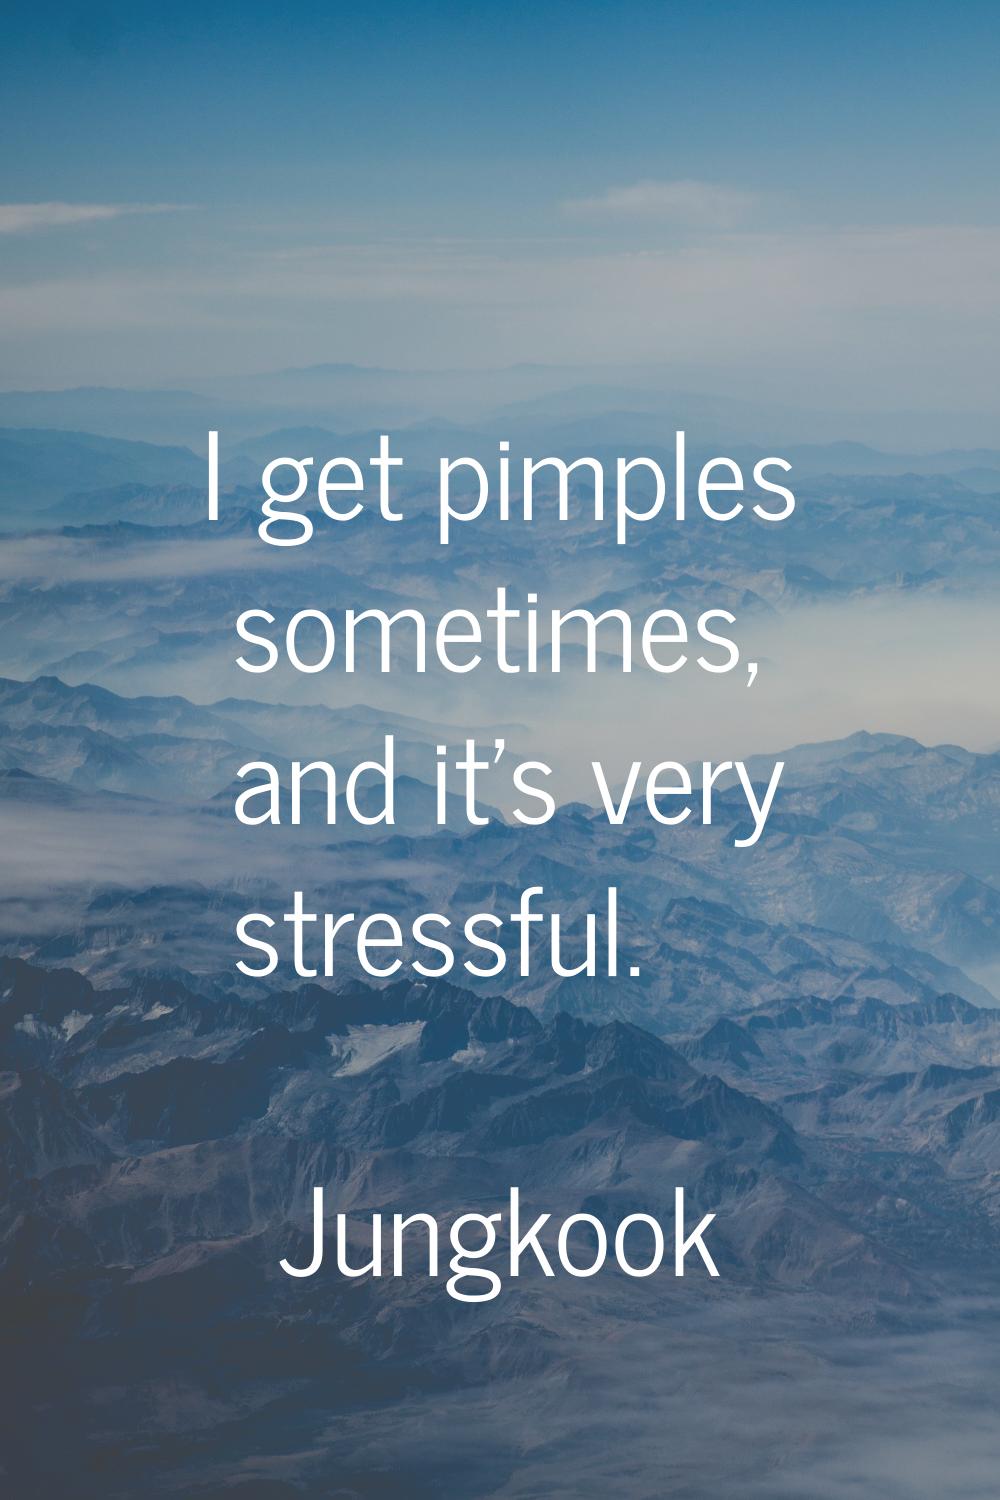 I get pimples sometimes, and it's very stressful.